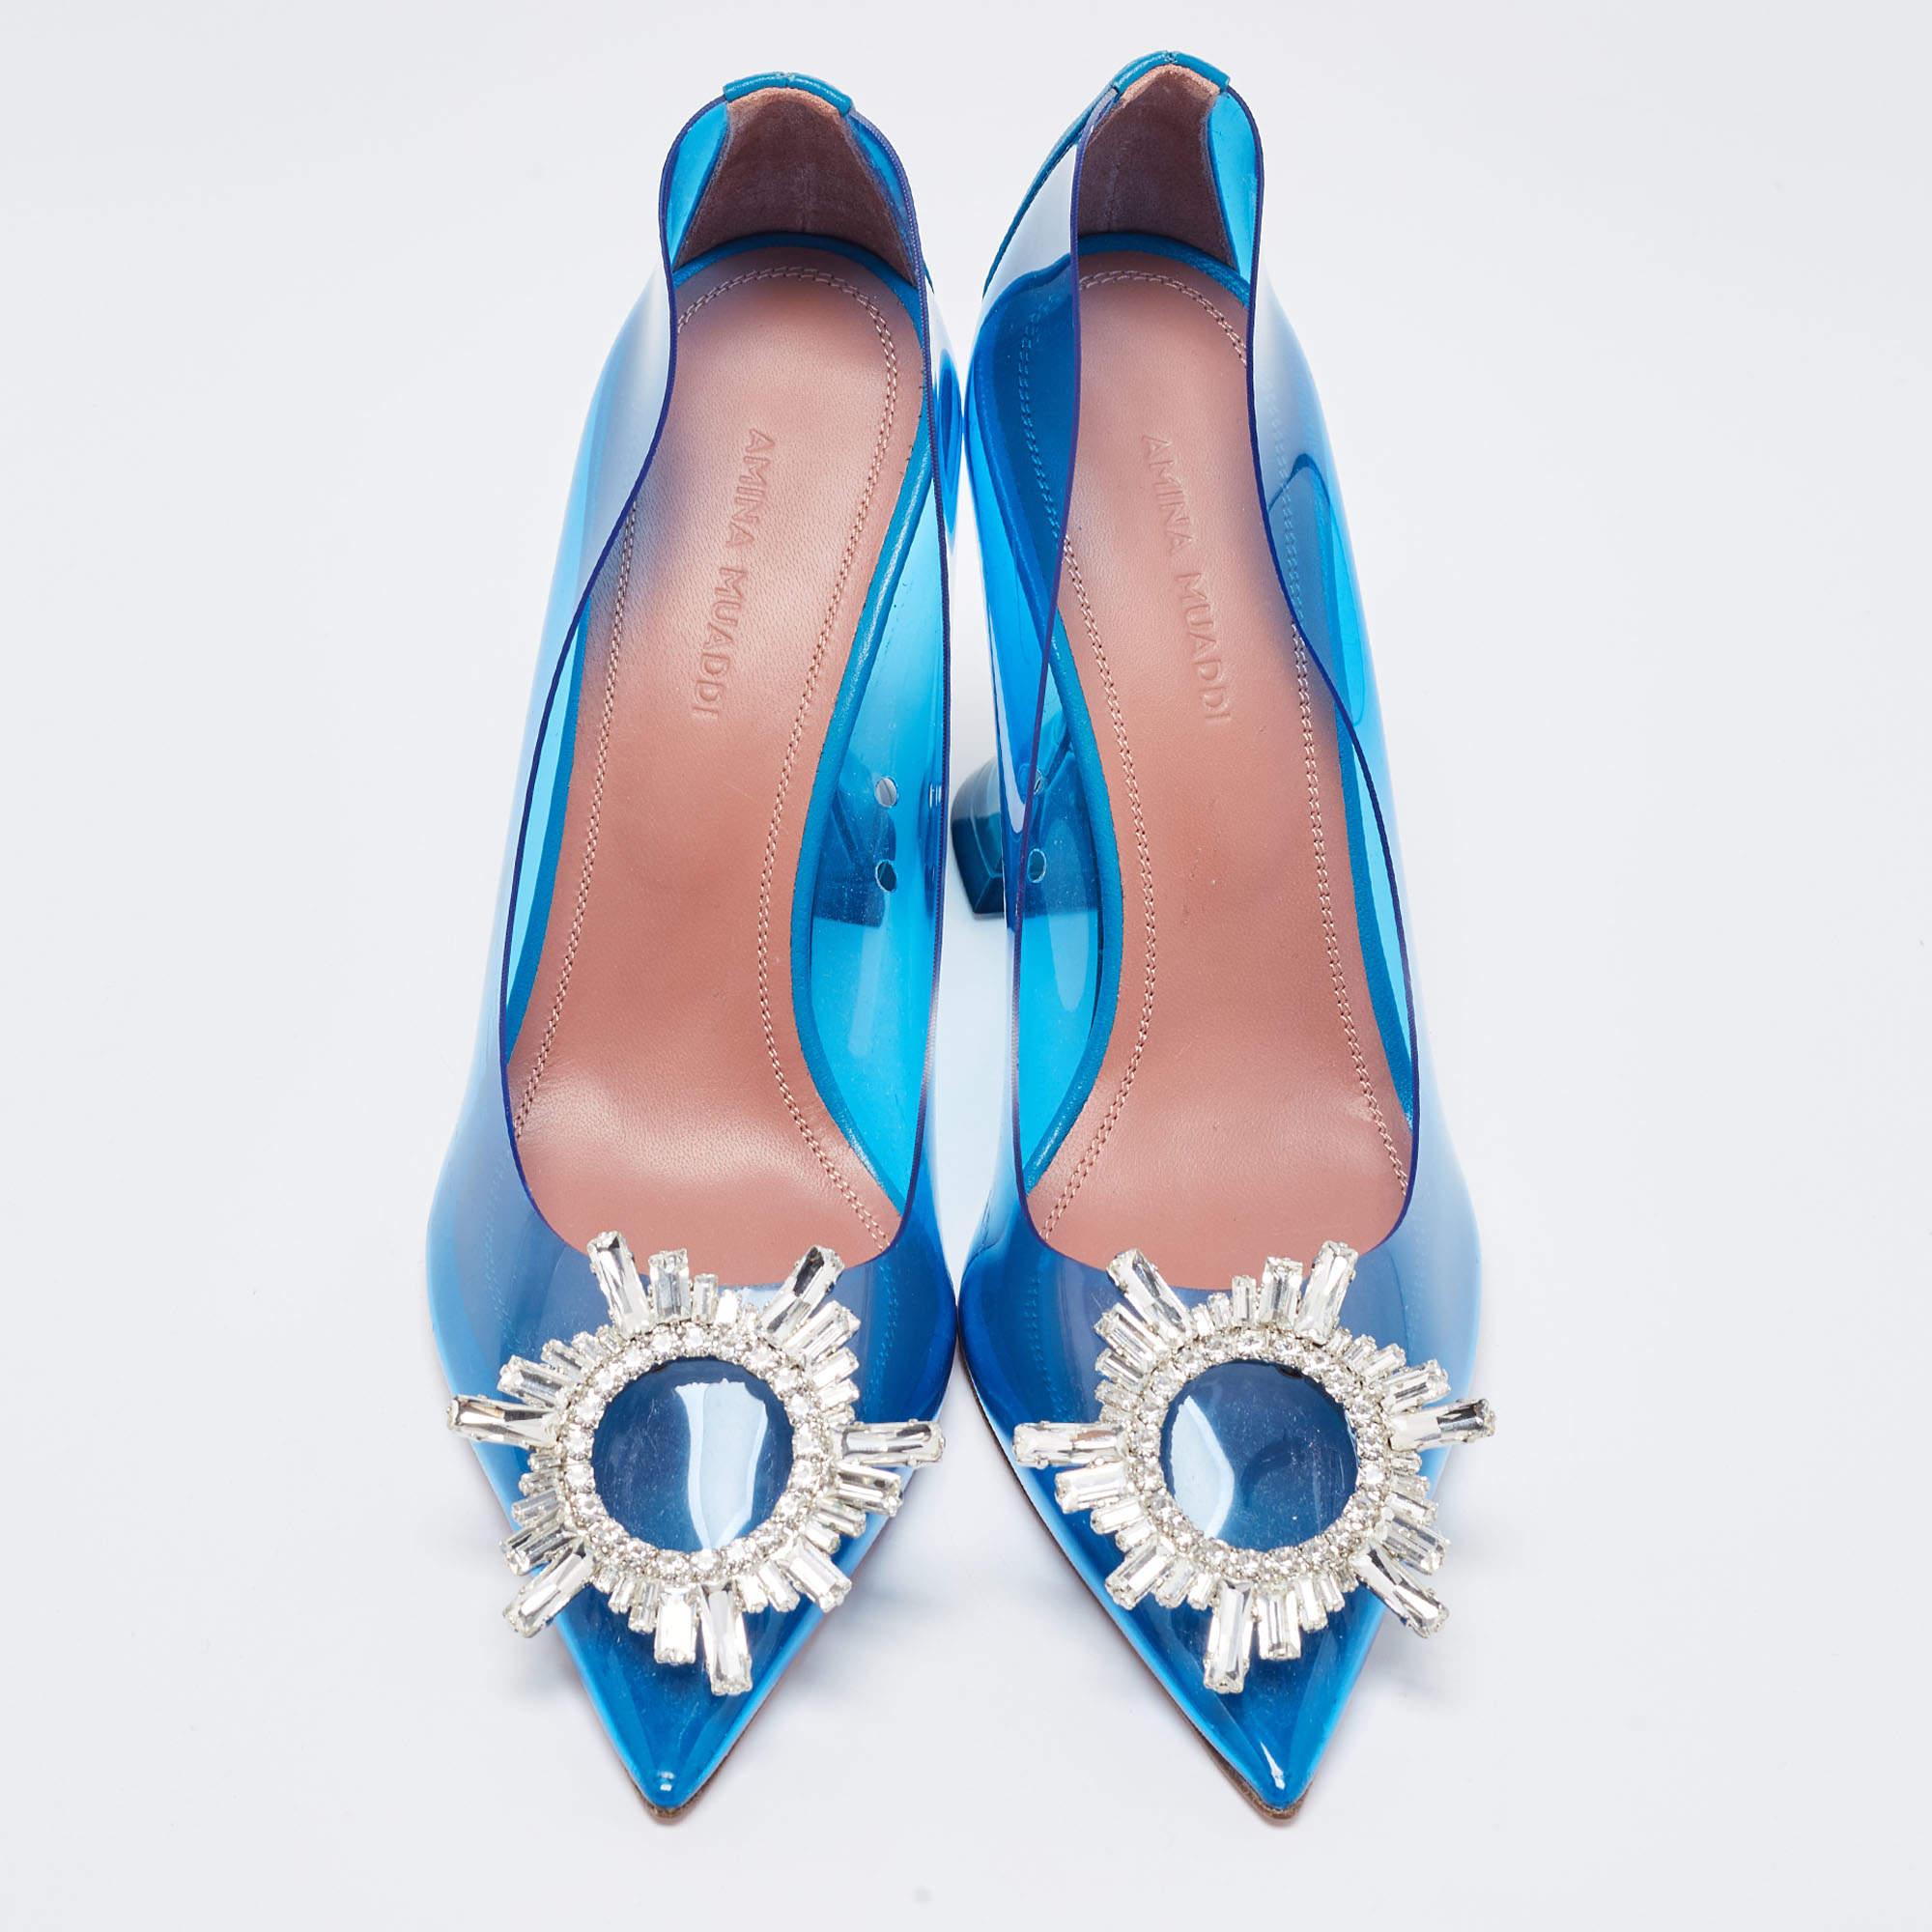 The Amina Muaddi Begum pumps are striking high-heeled shoes. They feature transparent blue PVC uppers, a pointed toe, and a sculpted heel with a signature flared design. These pumps exude modern elegance, combining transparency with a bold pop of